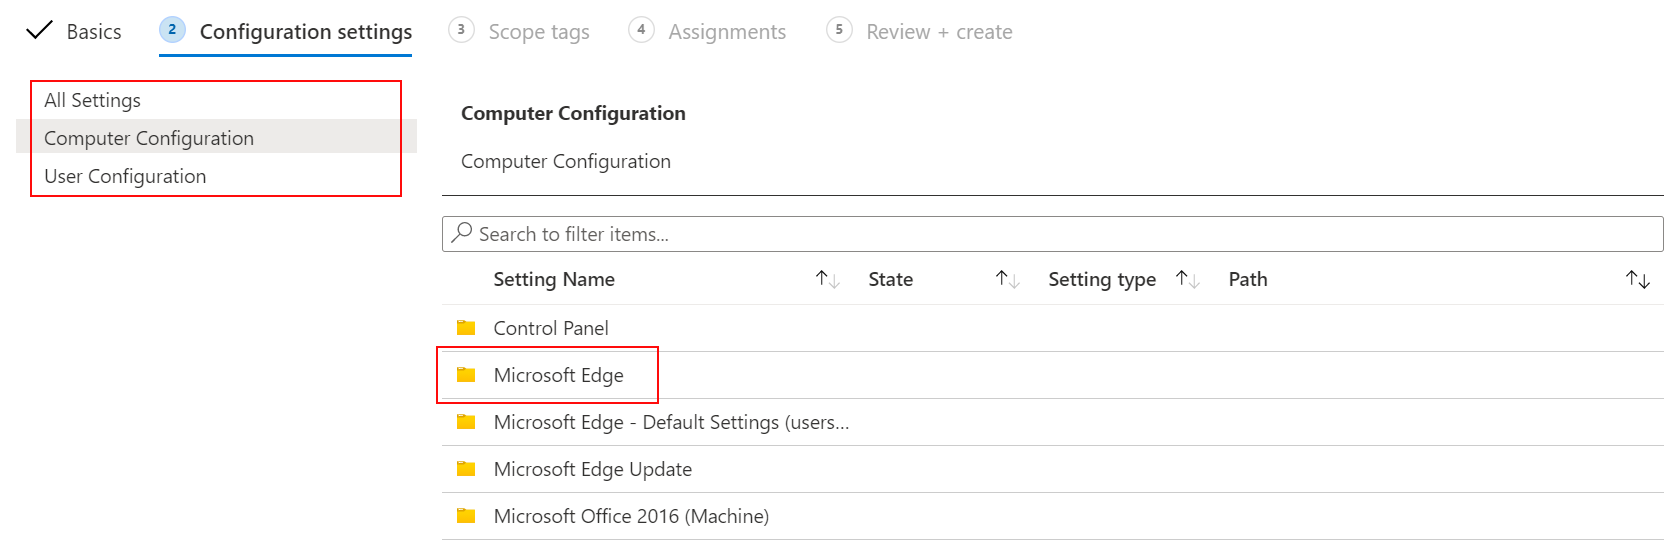 Screenshot that shows the ADMX settings for user configuration and computer configuration in Microsoft Intune and Intune admin center.